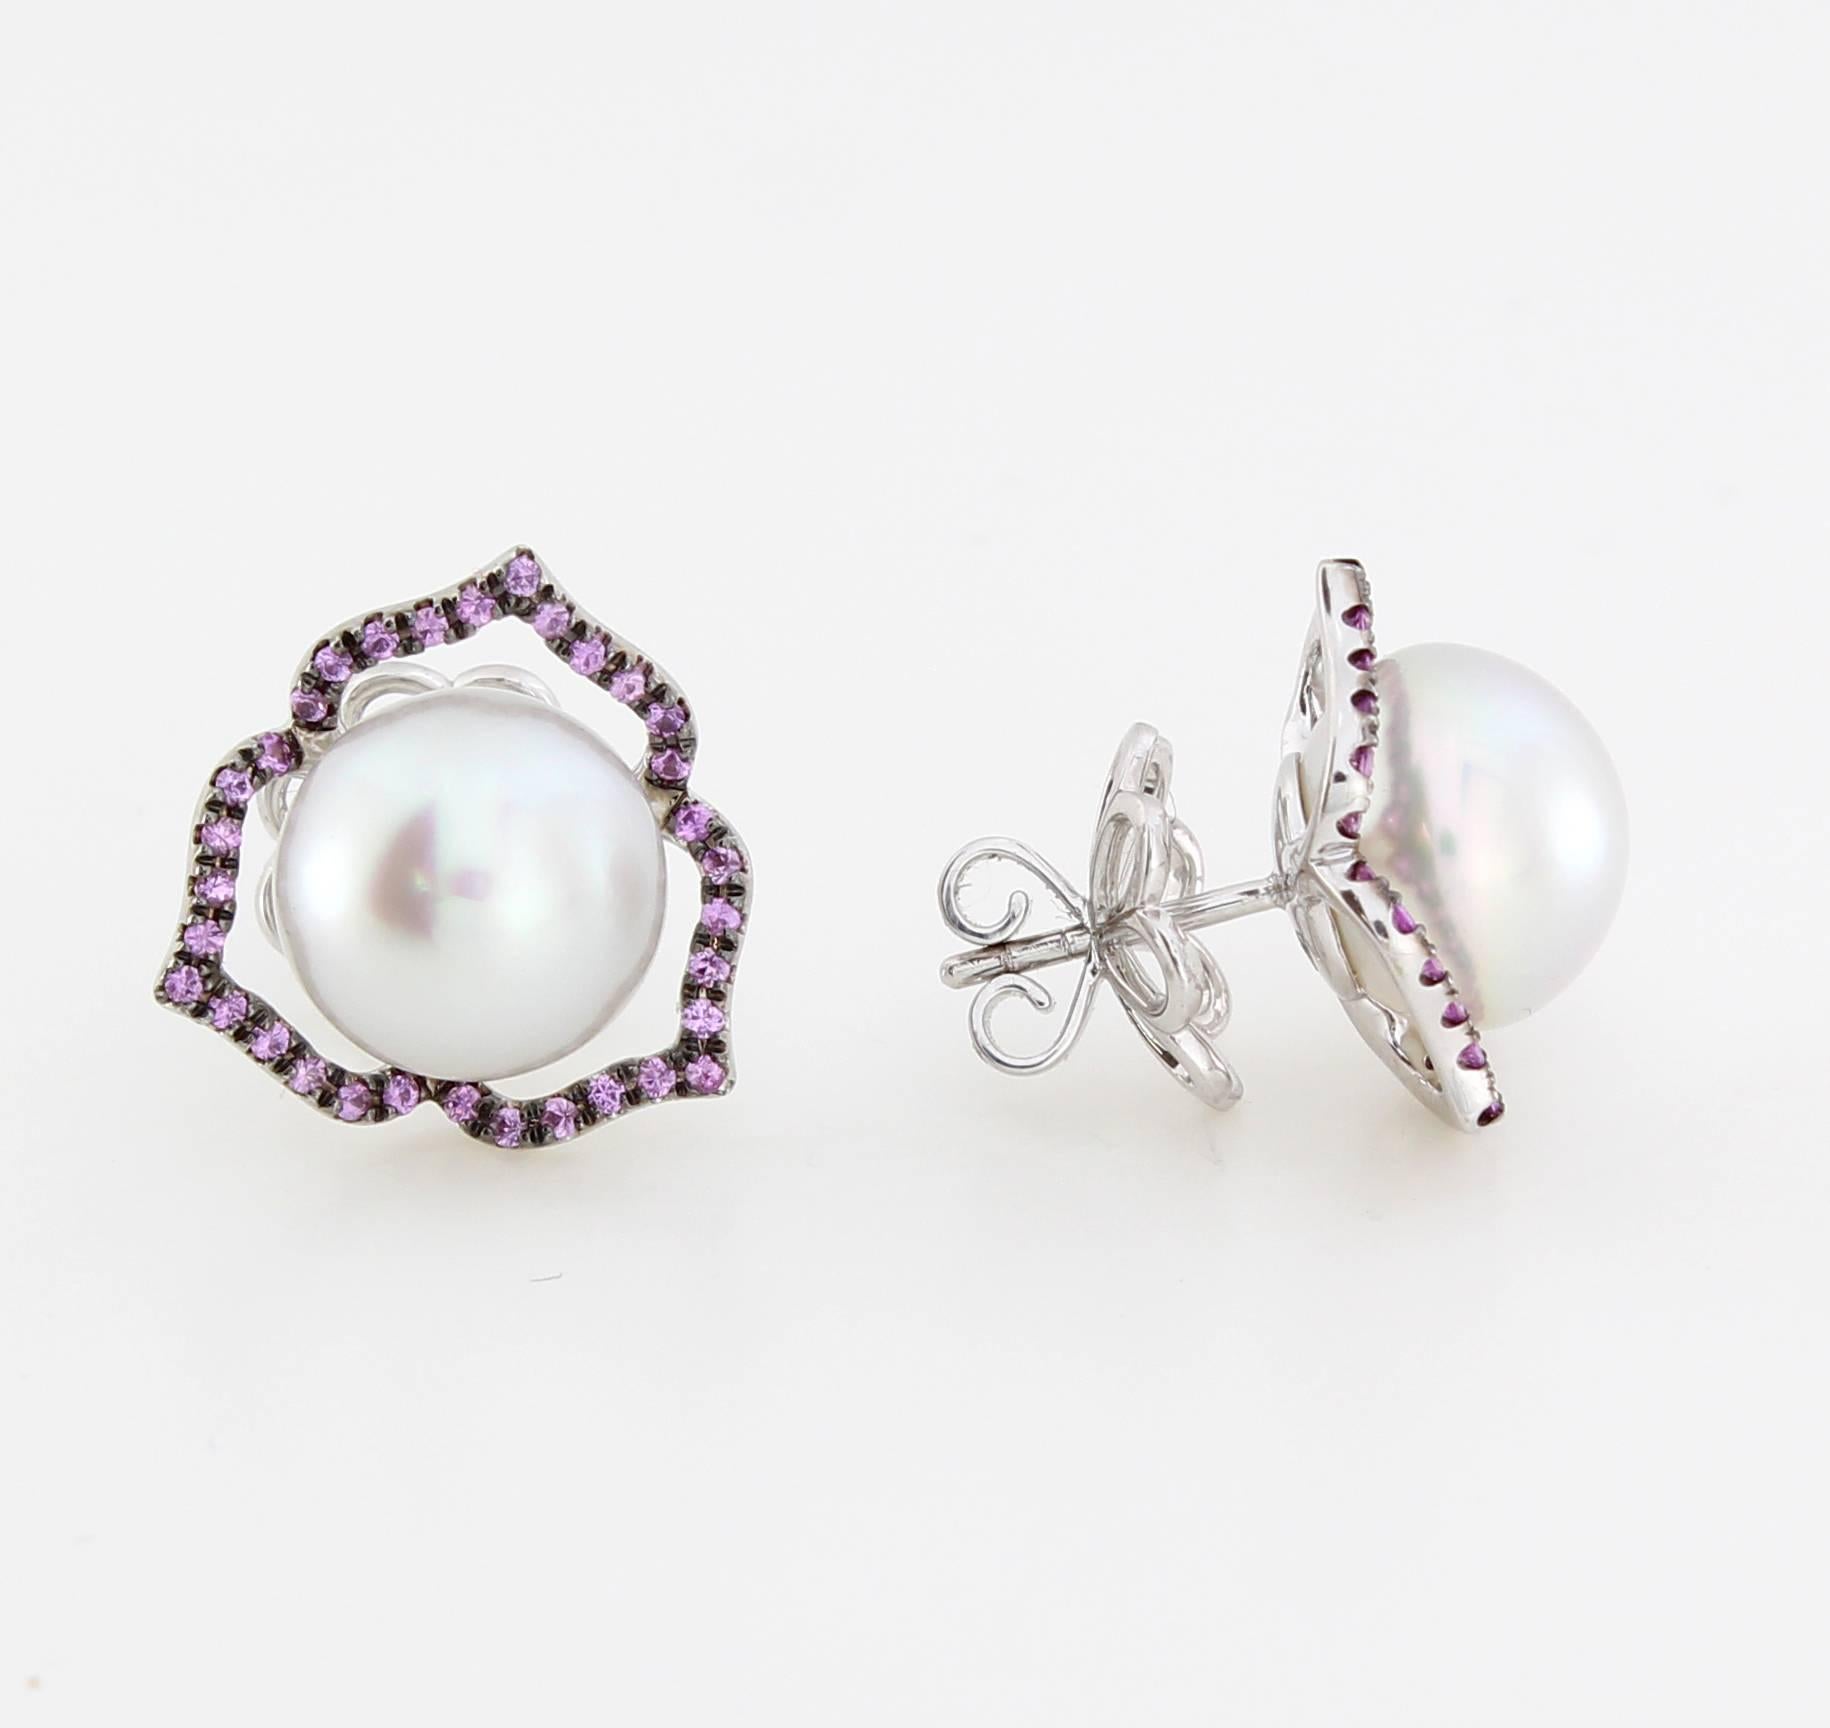 Contemporary Autore Pink Sapphire White South Sea Pearl Stud Earrings